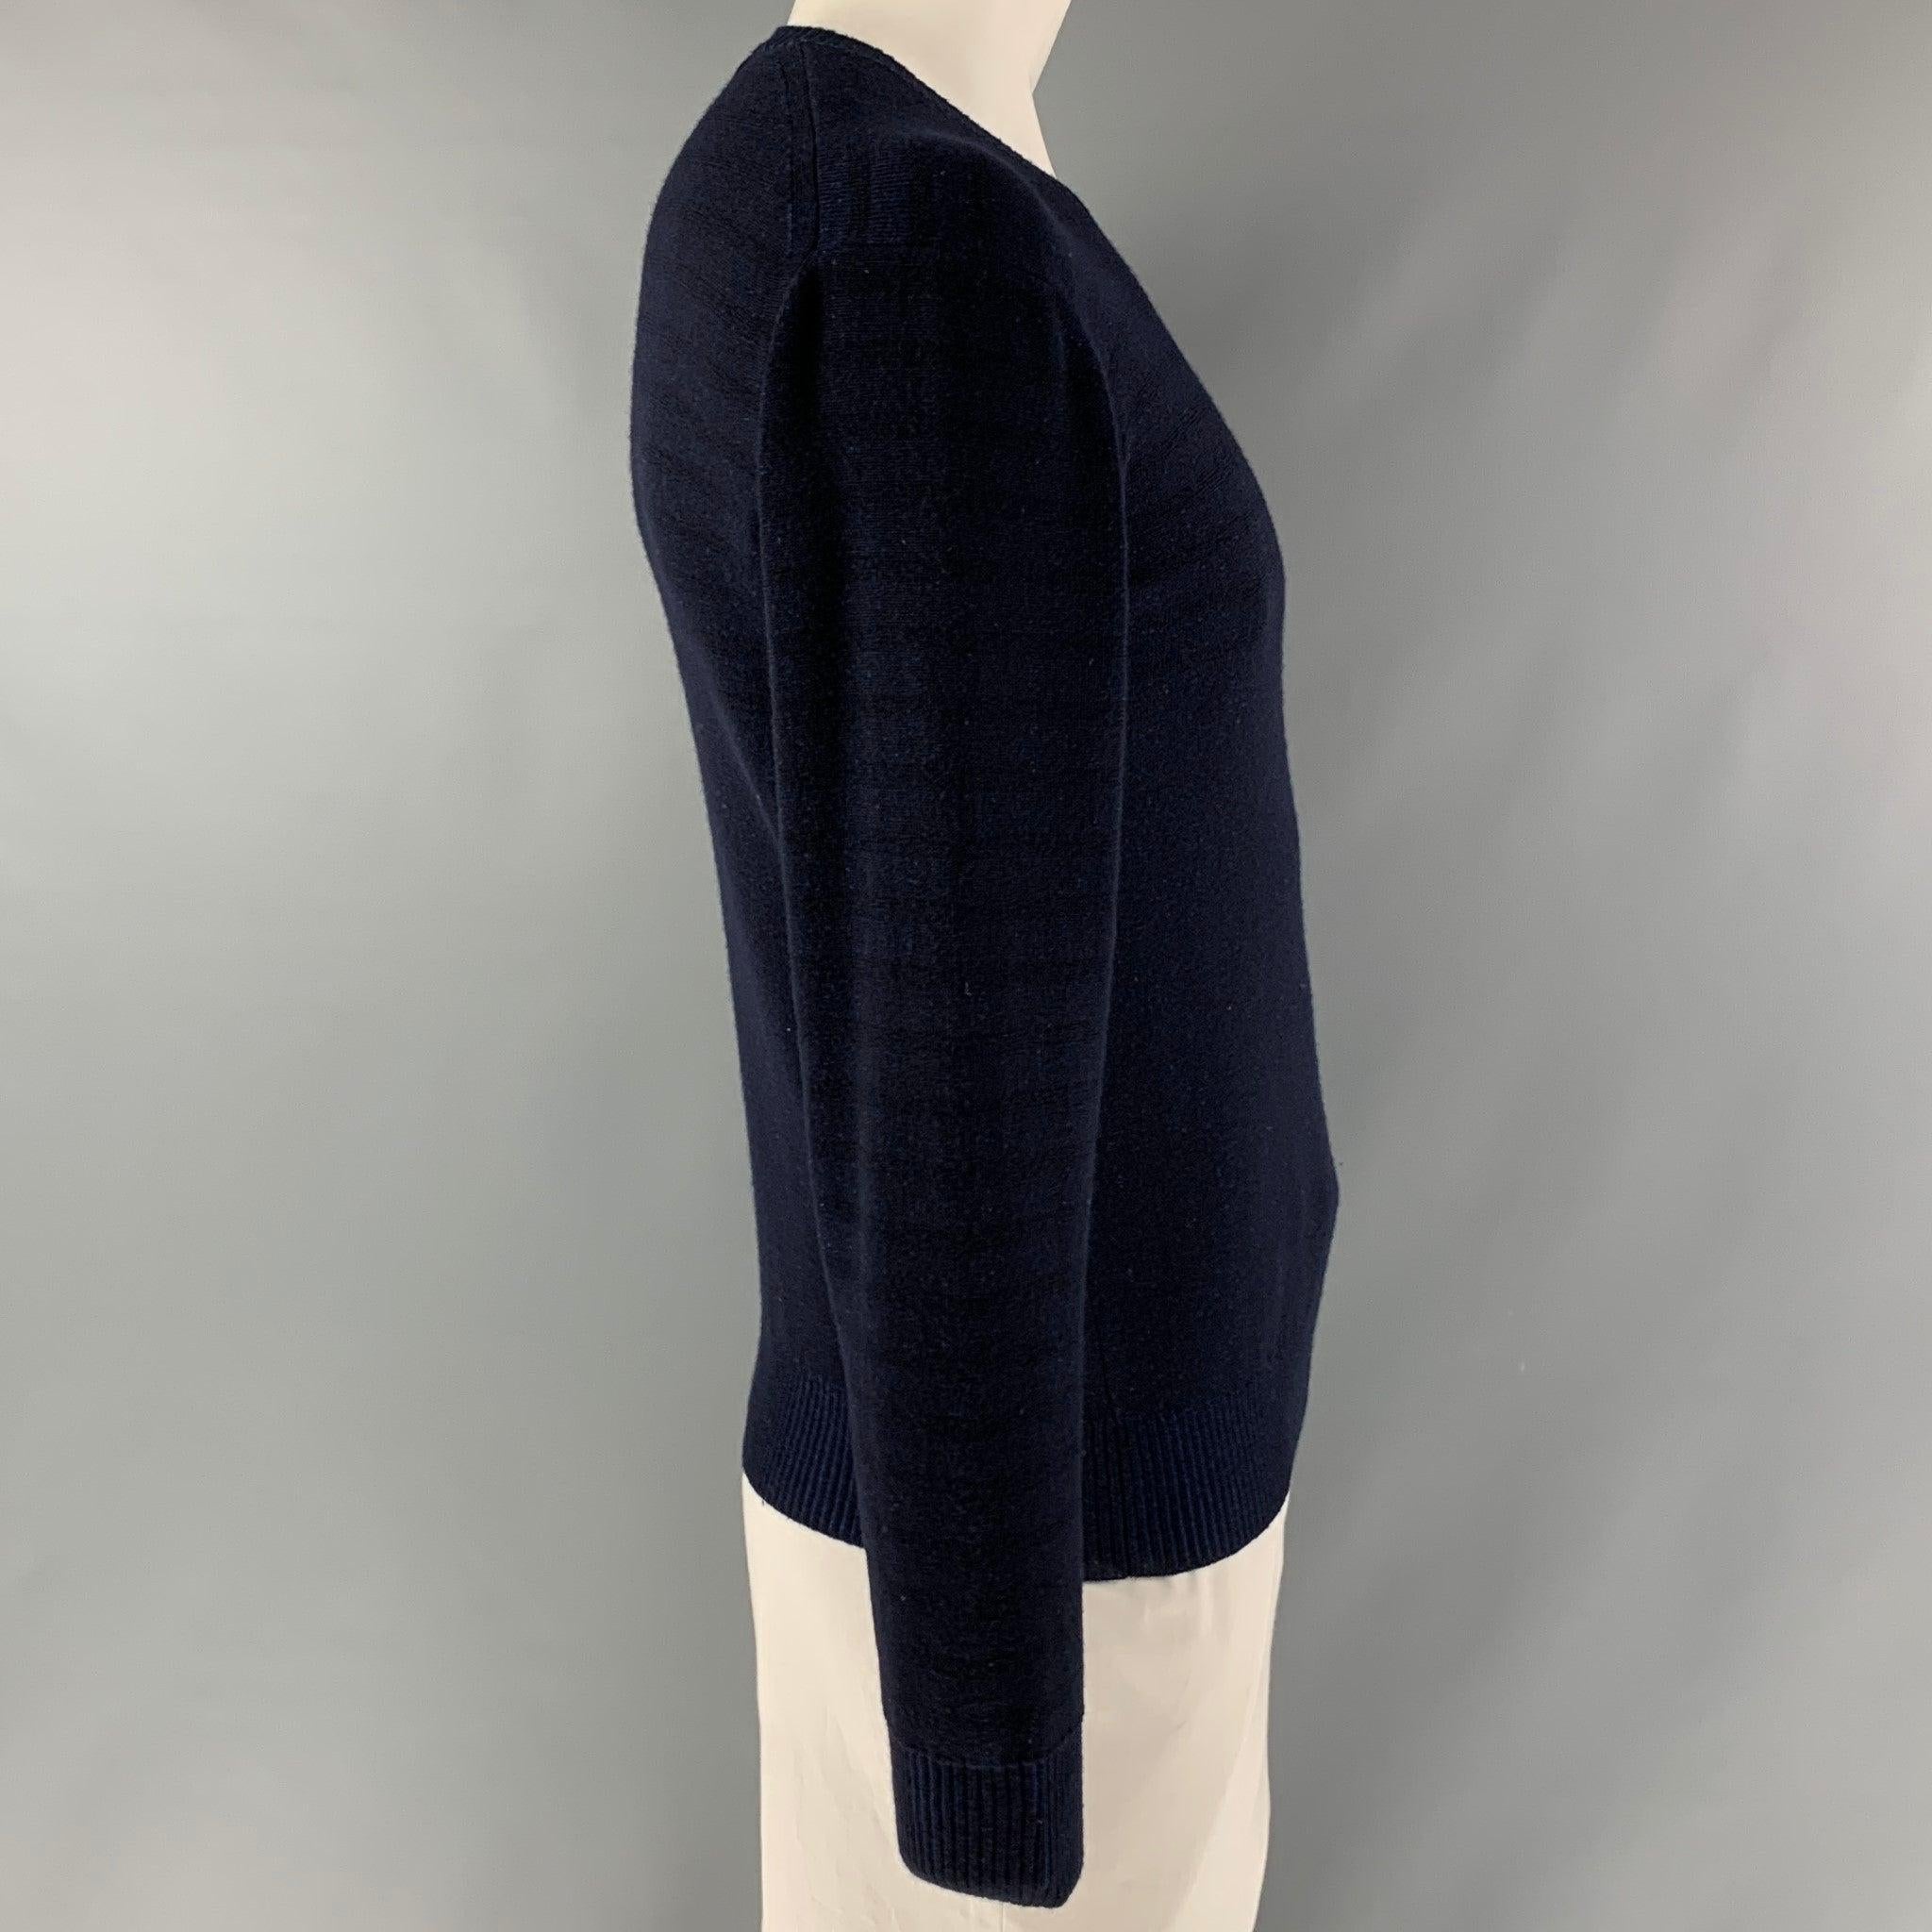 JUNYA WATANABE long sleeve pullover comes in a navy and black stripped wool blend jersey fabric featuring v-neck. Made in Japan.Very Good Pre-Owned Condition. Minor signs of wear. 
 

 Marked:  L 
 

 Measurements: 
  
 Shoulder: 23 inches Chest: 48